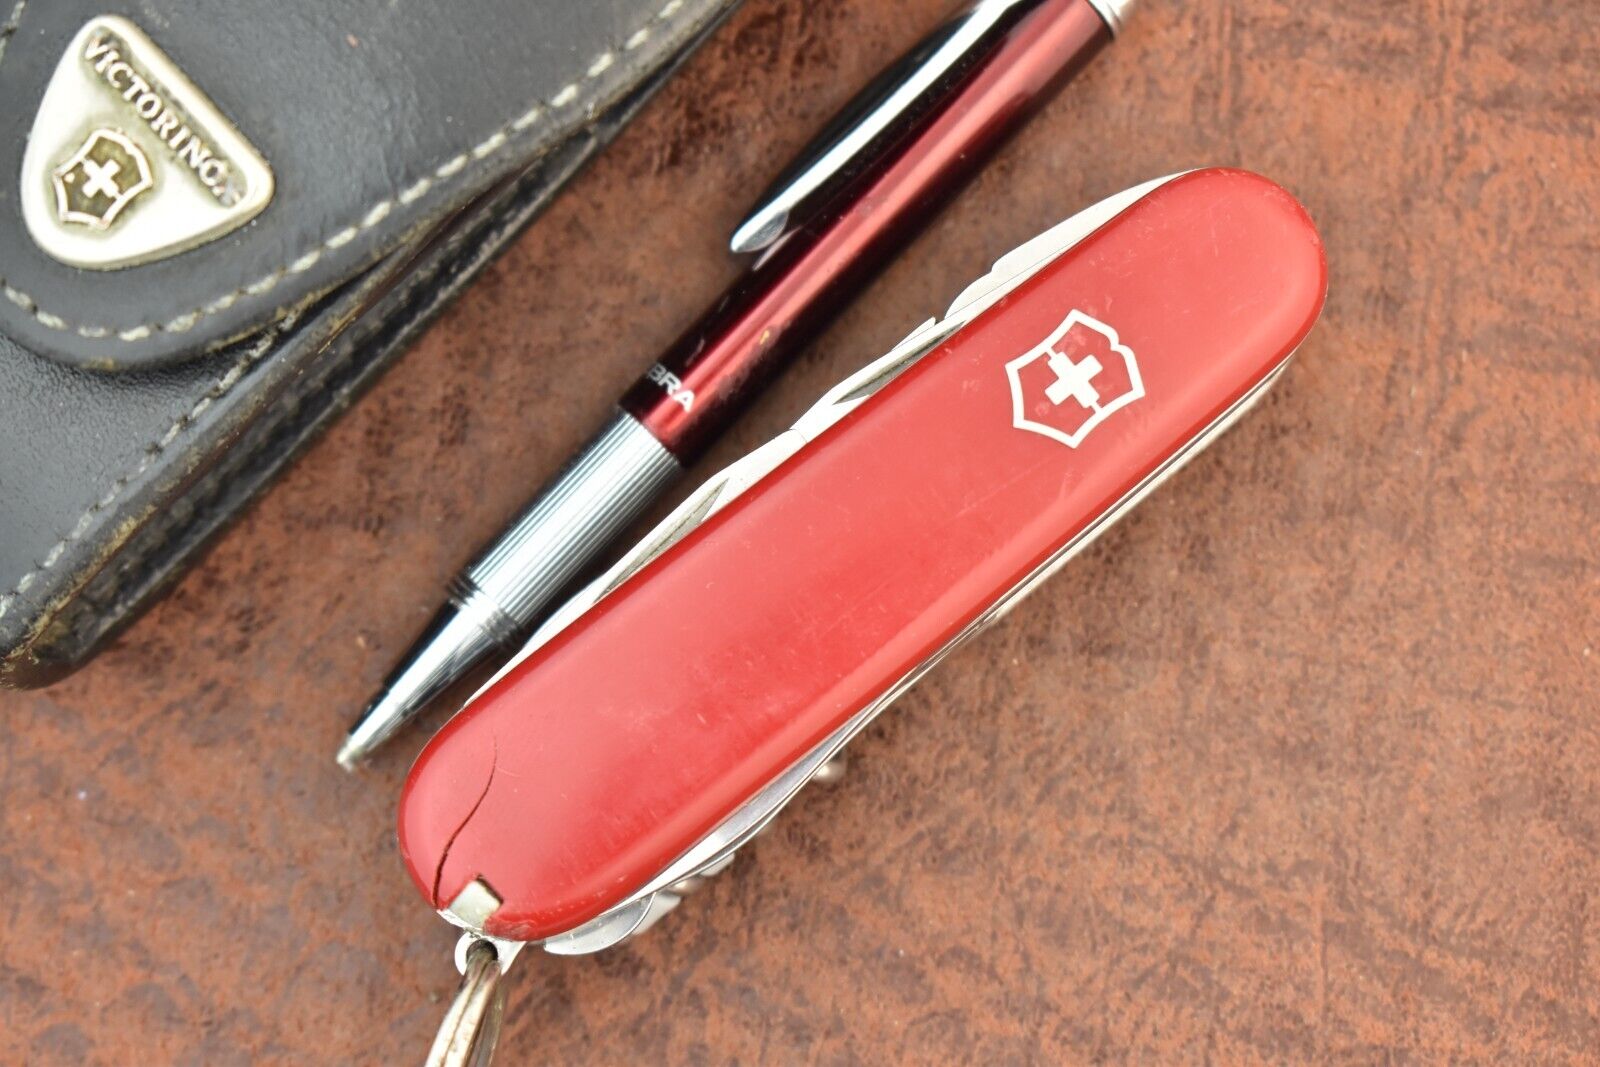 VICTORINOX SWITZERLAND SWISS MADE ARMY RED OFFICER SUISSE KNIFE W/SHEATH (14693)